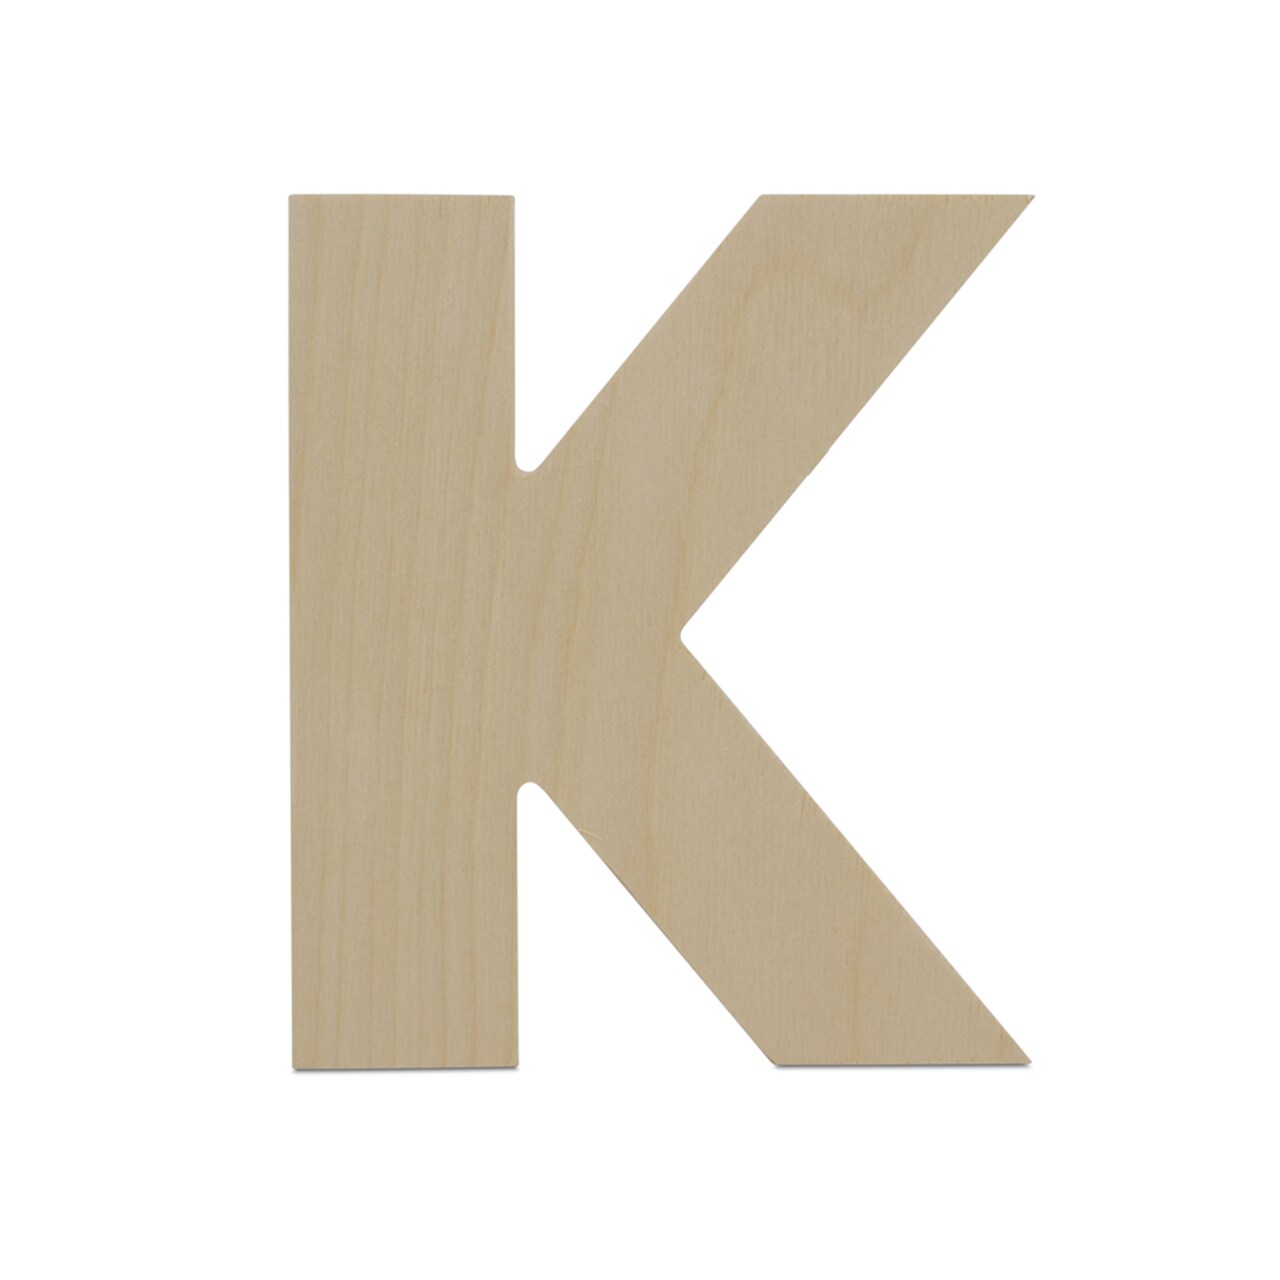 Wooden Letter K 12 inch or 8 inch, Unfinished Large Wood Letters for Crafts | Woodpeckers